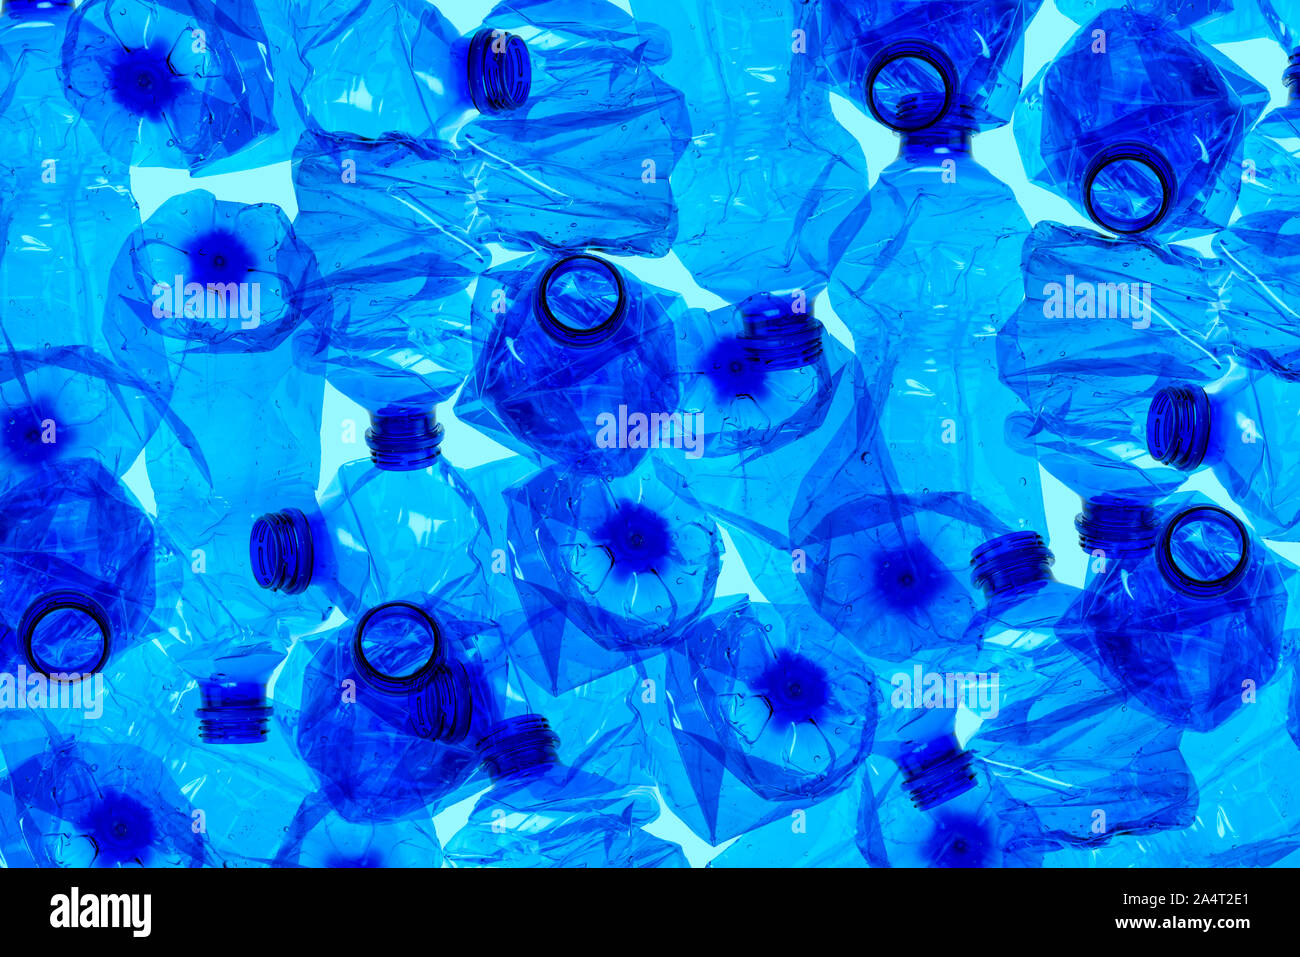 Used plastic bottles background. Recyclable waste concept. Stock Photo